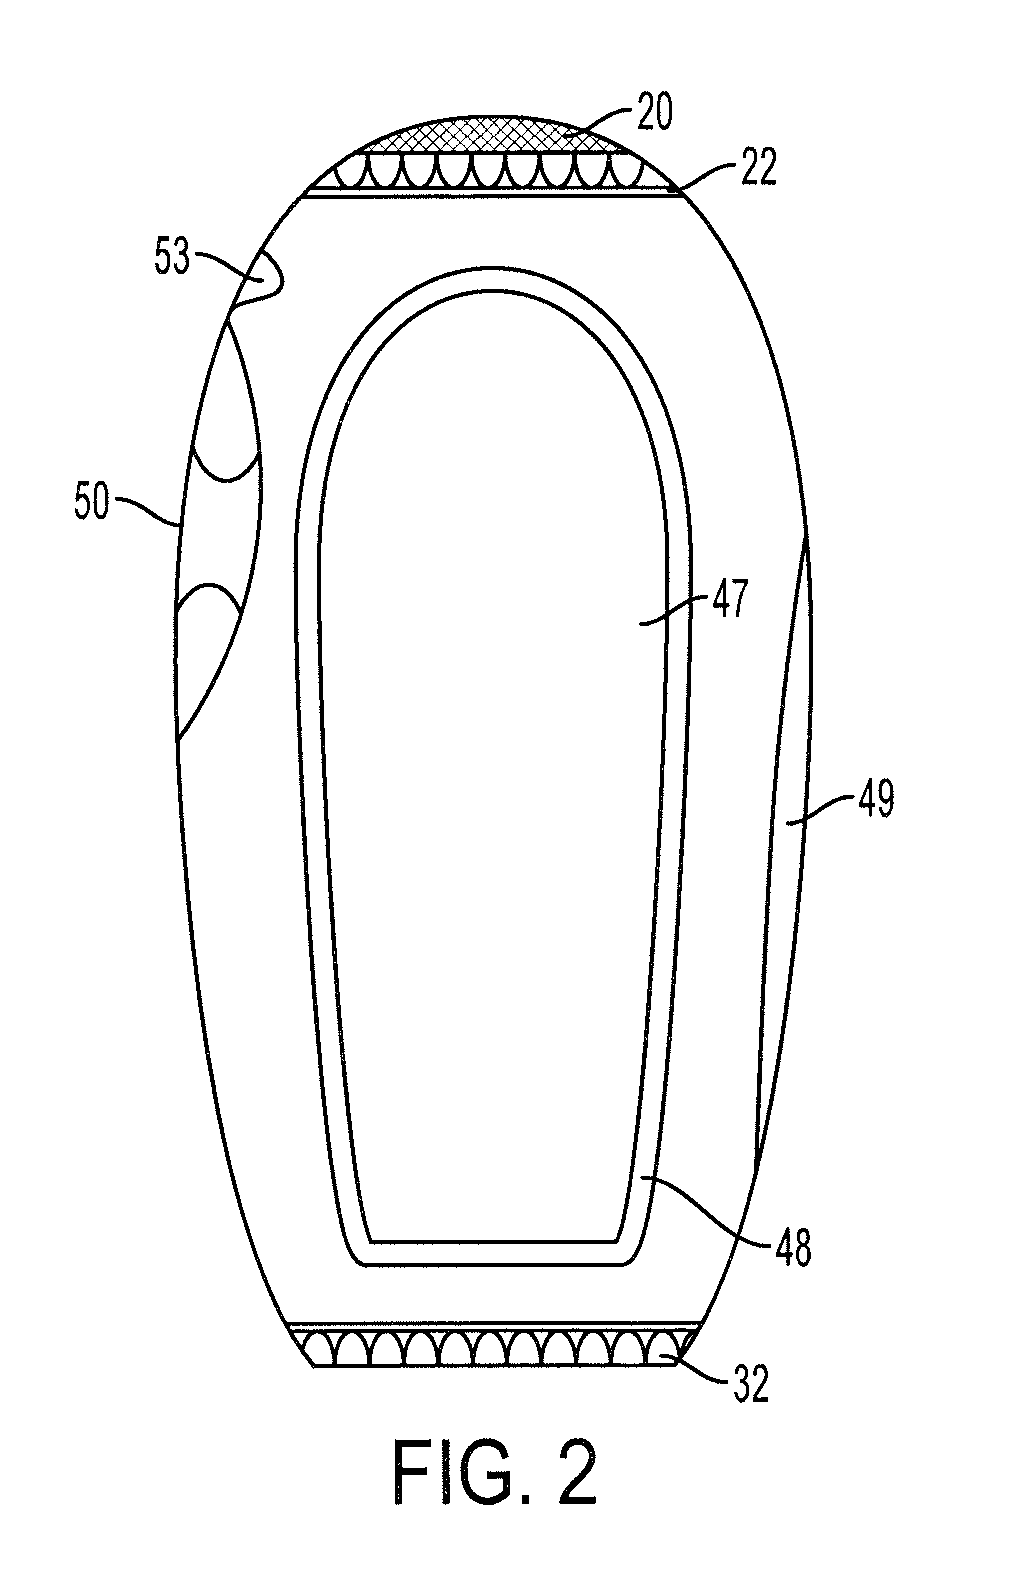 Fluid mixing and dispensing container